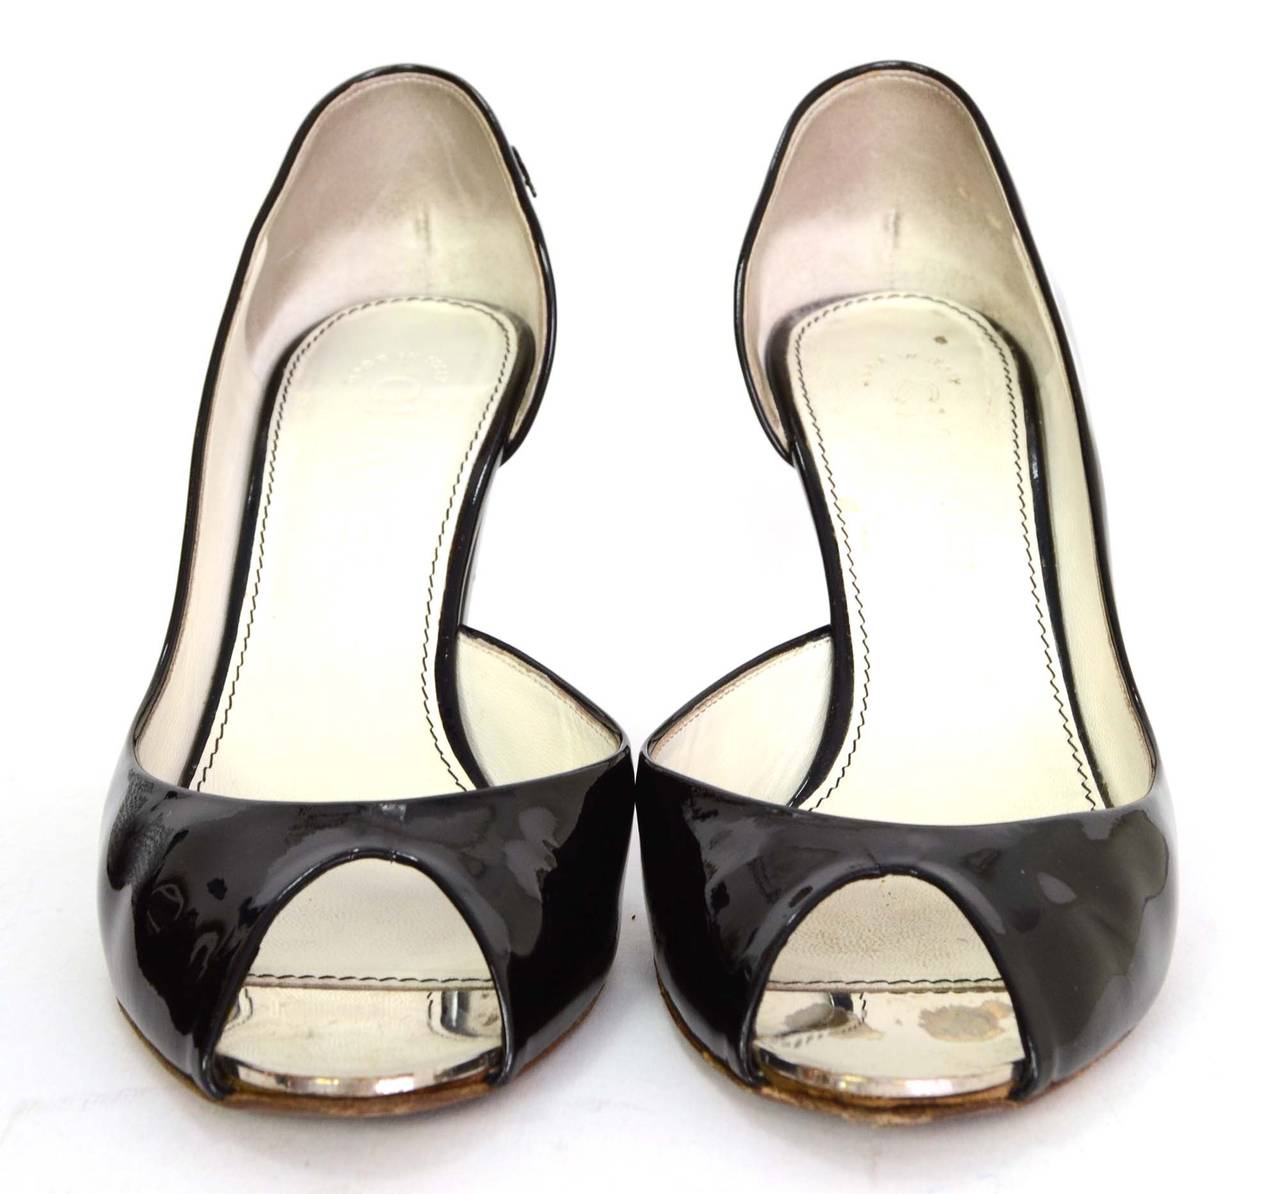 Chanel Black Patent Peep-Toe Pumps
Features a mirror/metal toe on interior of shoe
Made in: Italy
Color: Black
Composition: Patent leather and metal
Sole Stamp: CC 36 1/2 Made in Italy
Closure/opening: Slide on
Overall Condition: Excellent